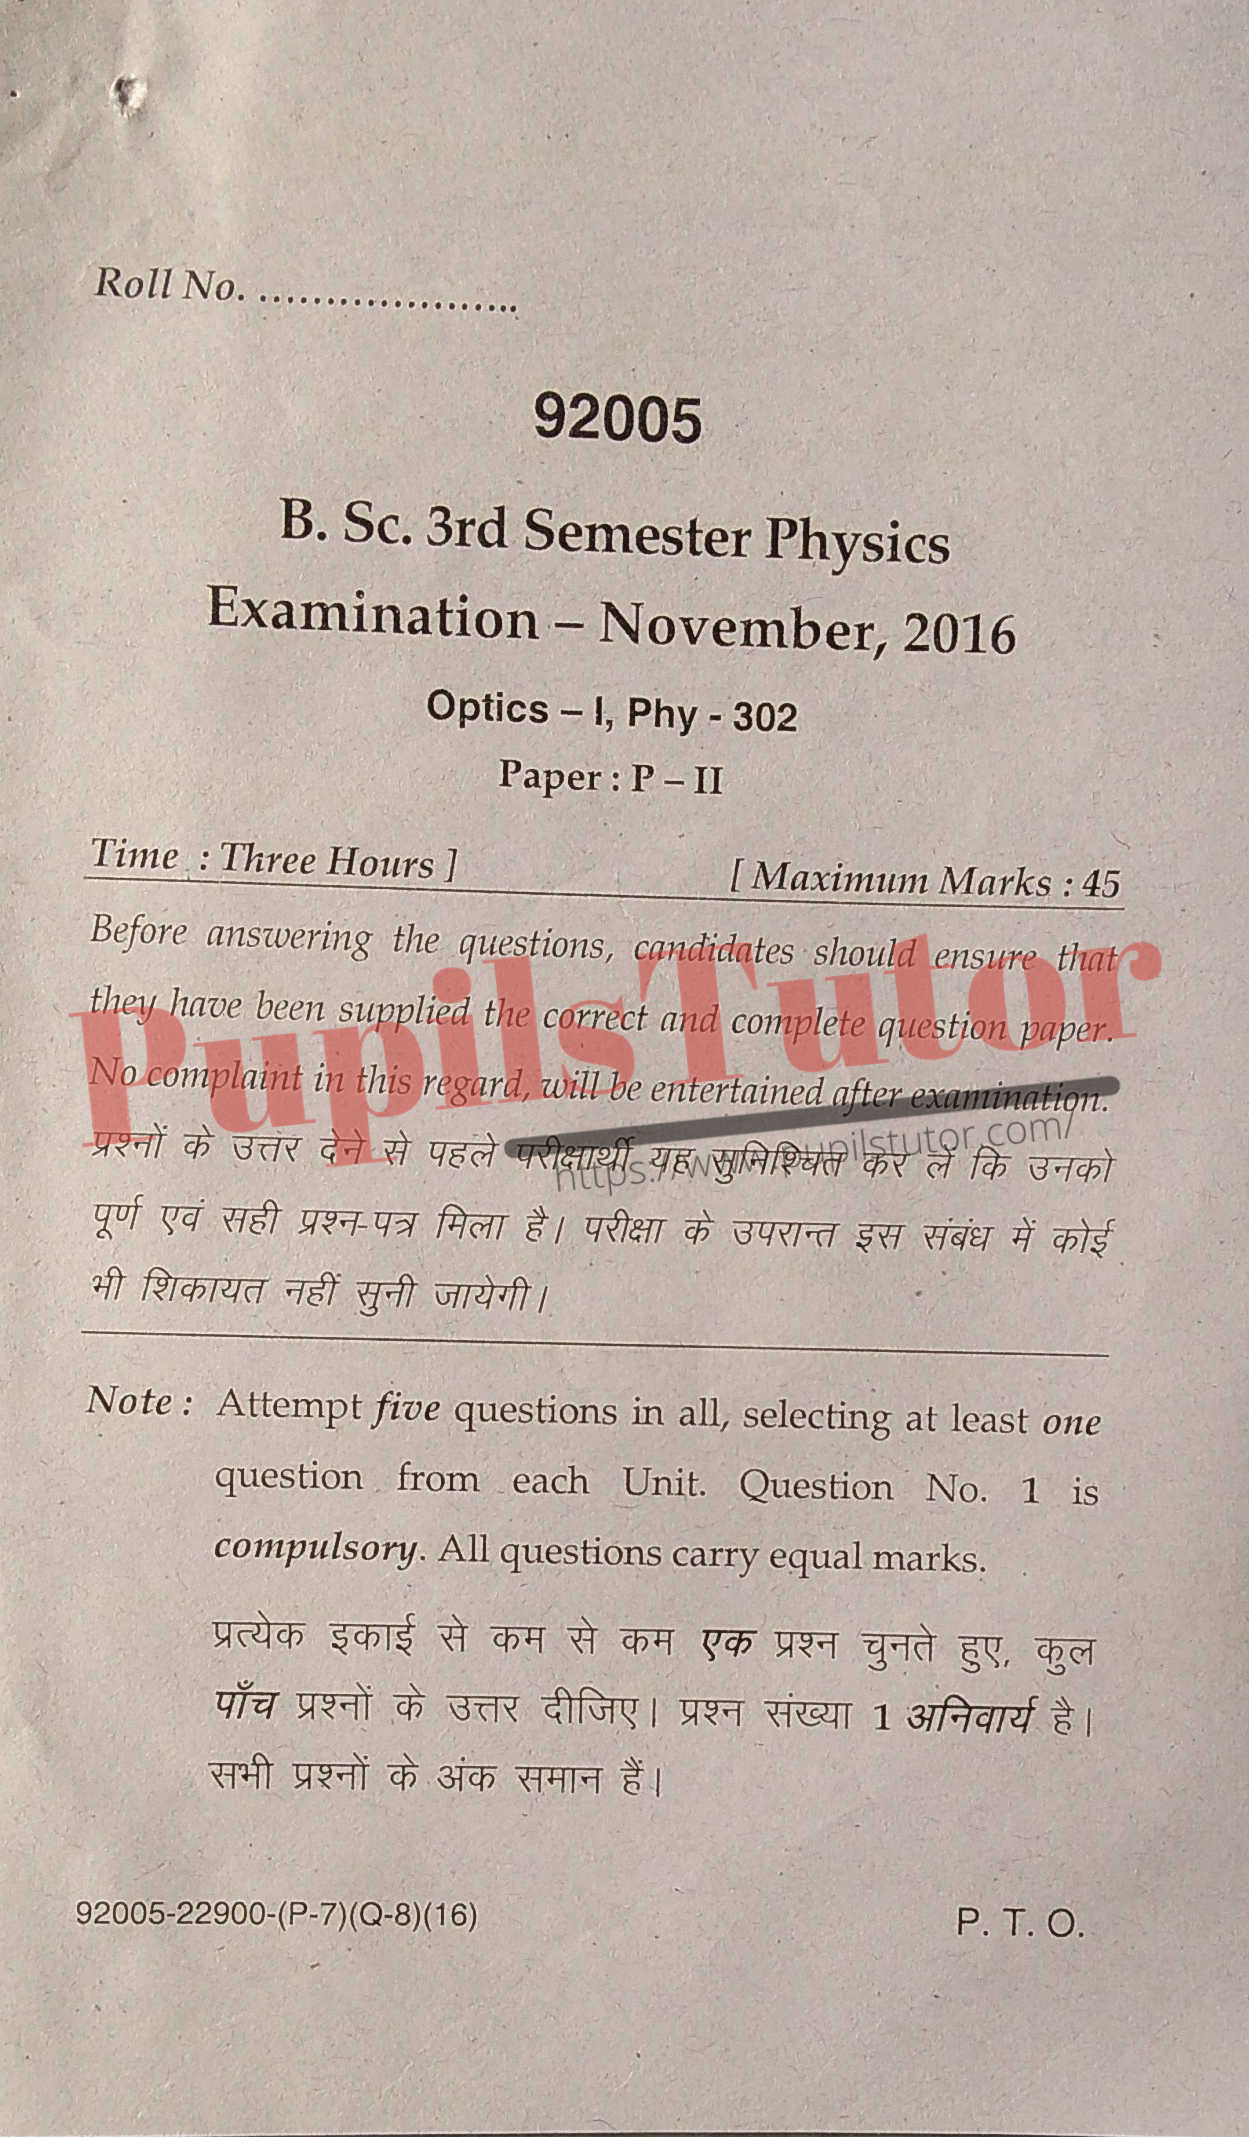 MDU (Maharshi Dayanand University, Rohtak Haryana) BSc Physics Pass Course Third Semester Previous Year Optics Question Paper For November, 2016 Exam (Question Paper Page 1) - pupilstutor.com